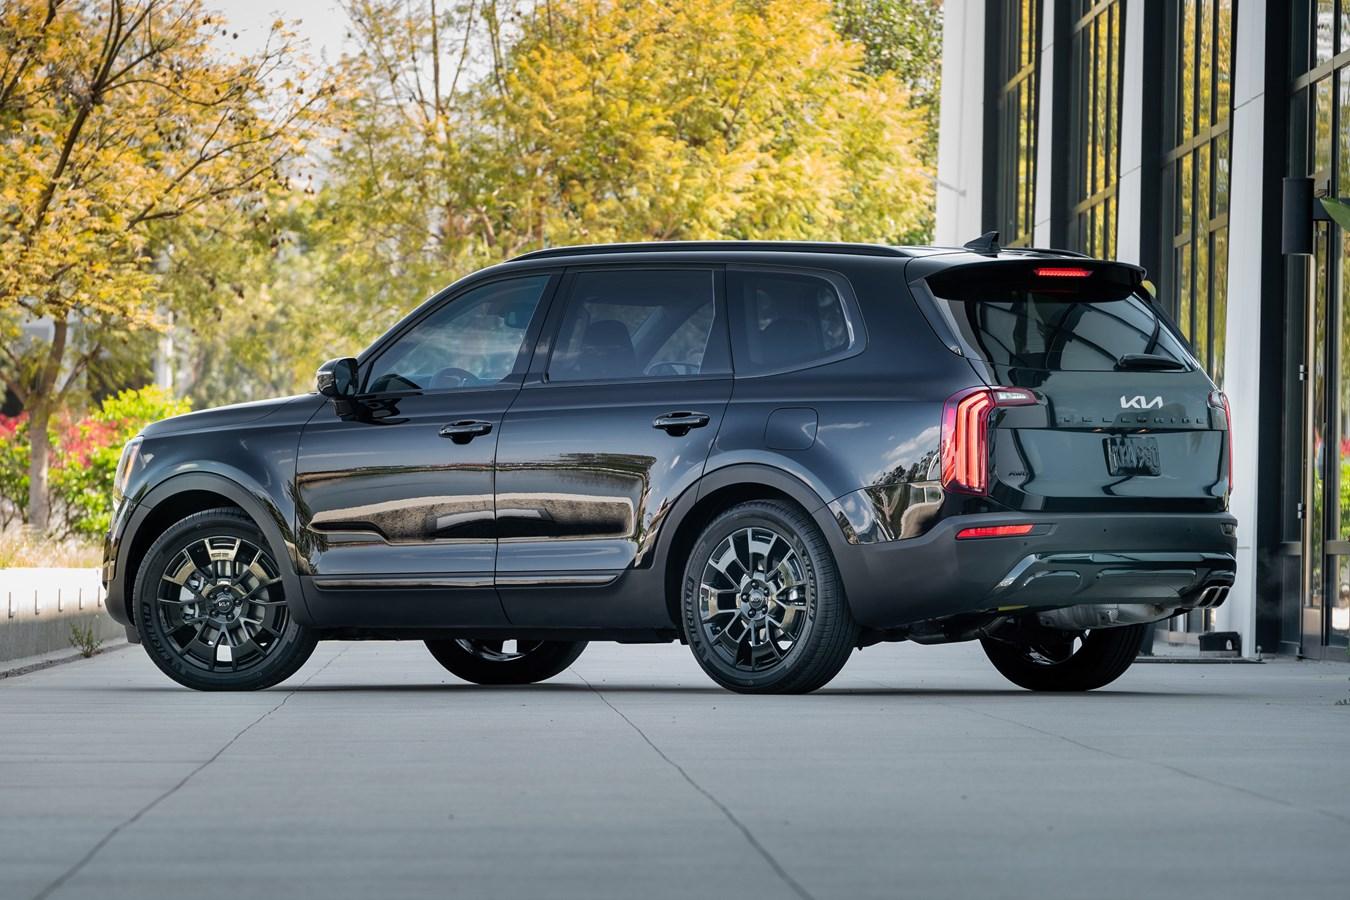 The Kia Telluride offers a comfortable third row.